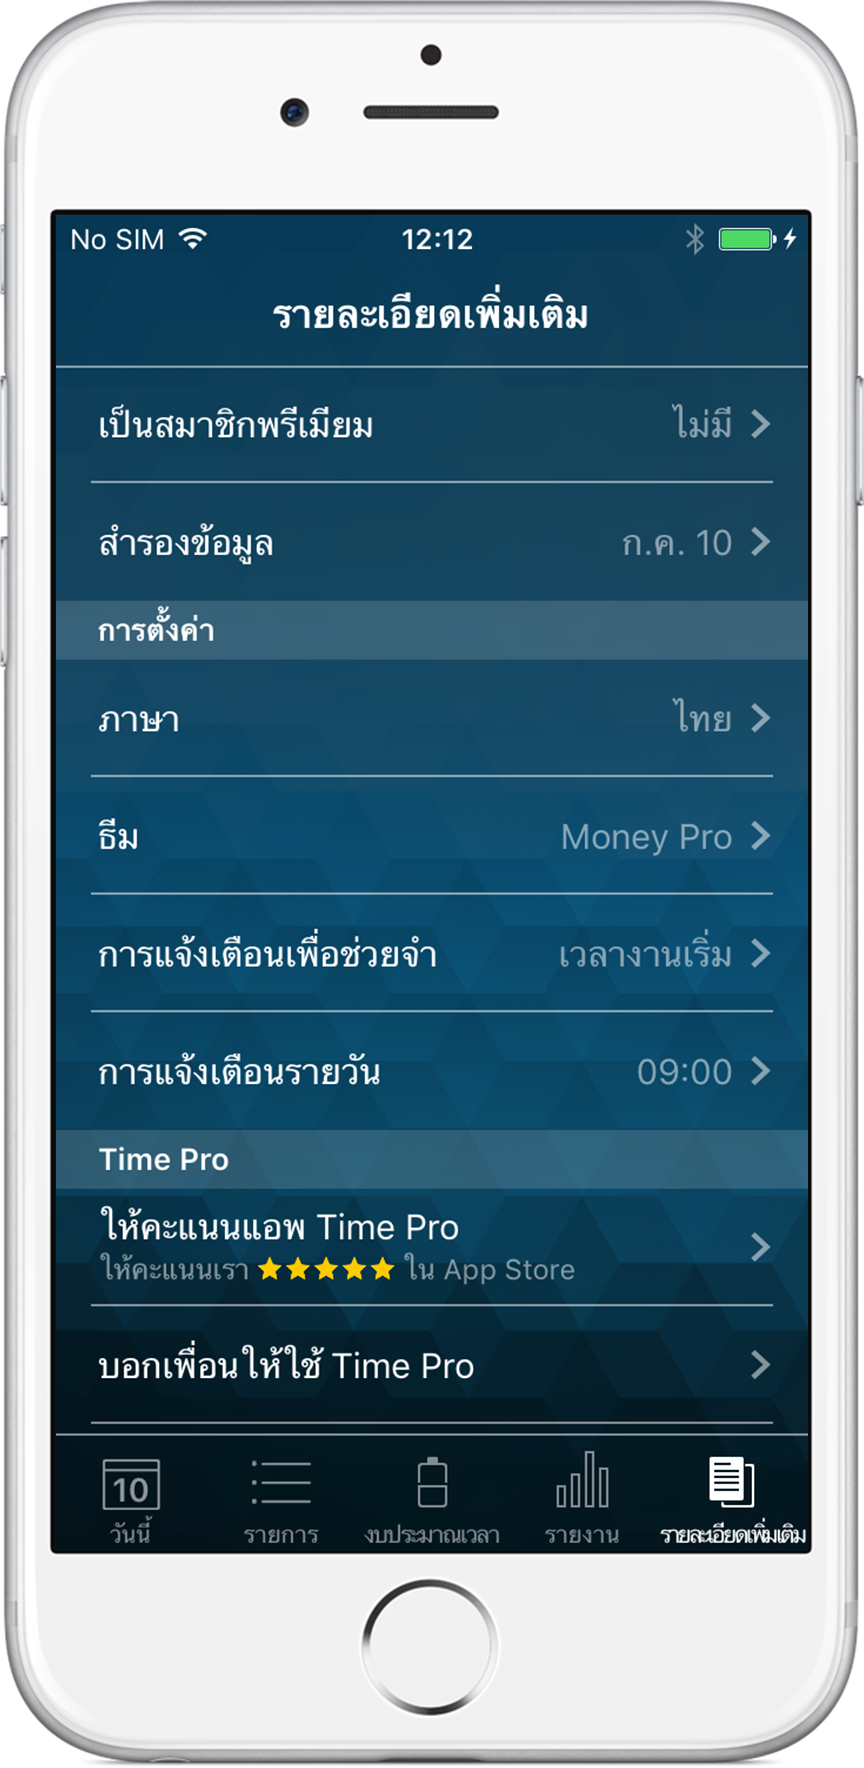 Time Pro บน iPhone - More